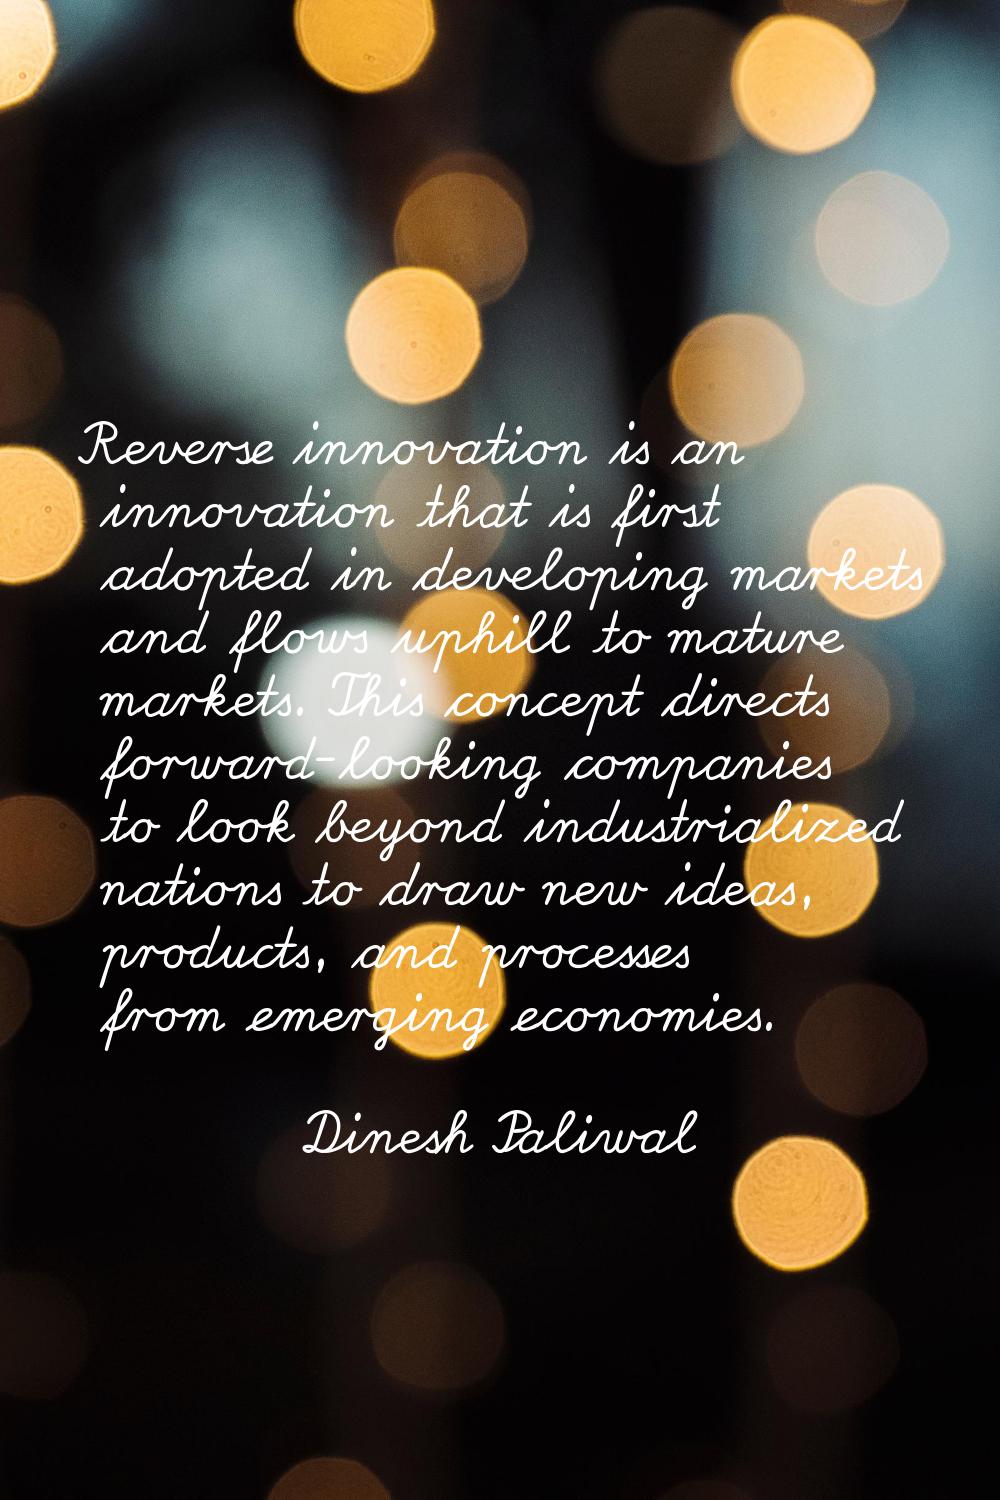 Reverse innovation is an innovation that is first adopted in developing markets and flows uphill to